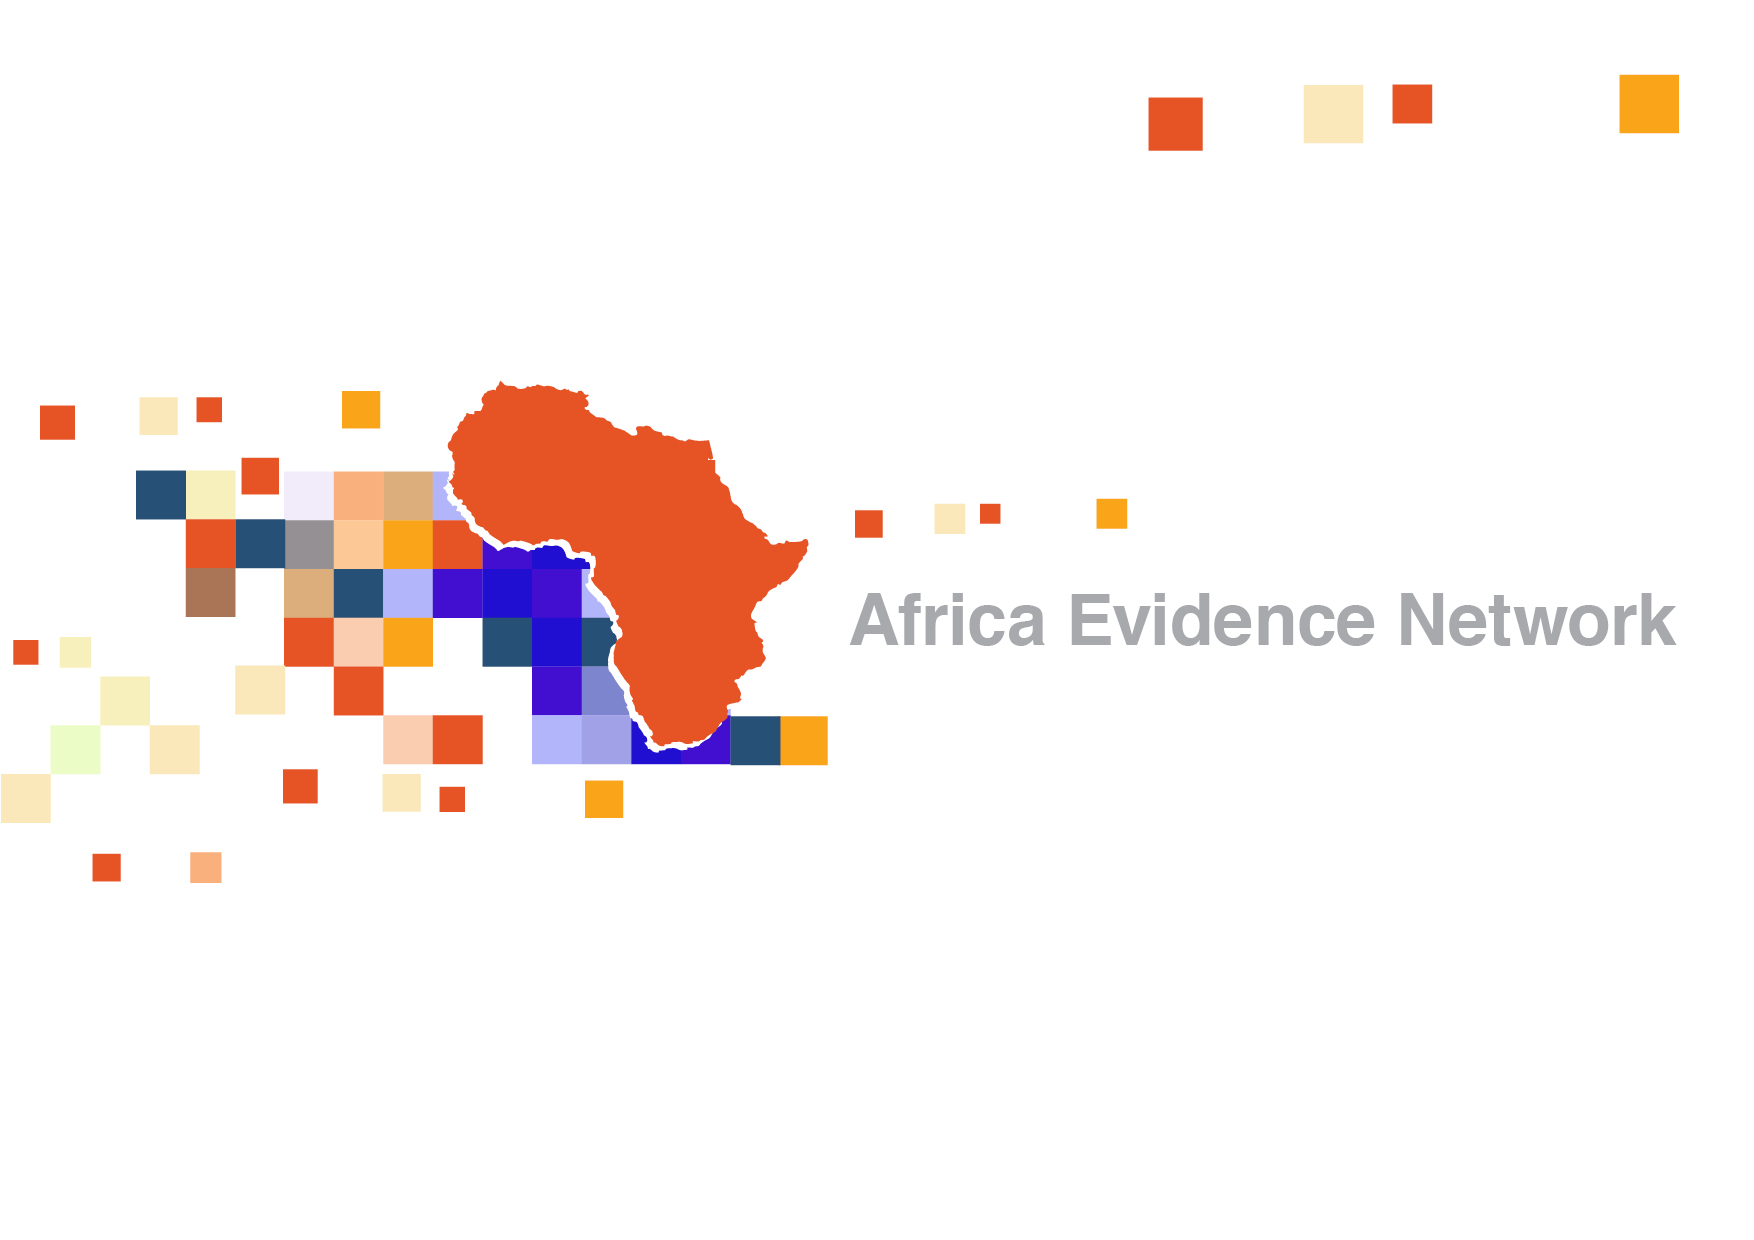 Evidence & Policy in Africa: Welcome to the AEN!